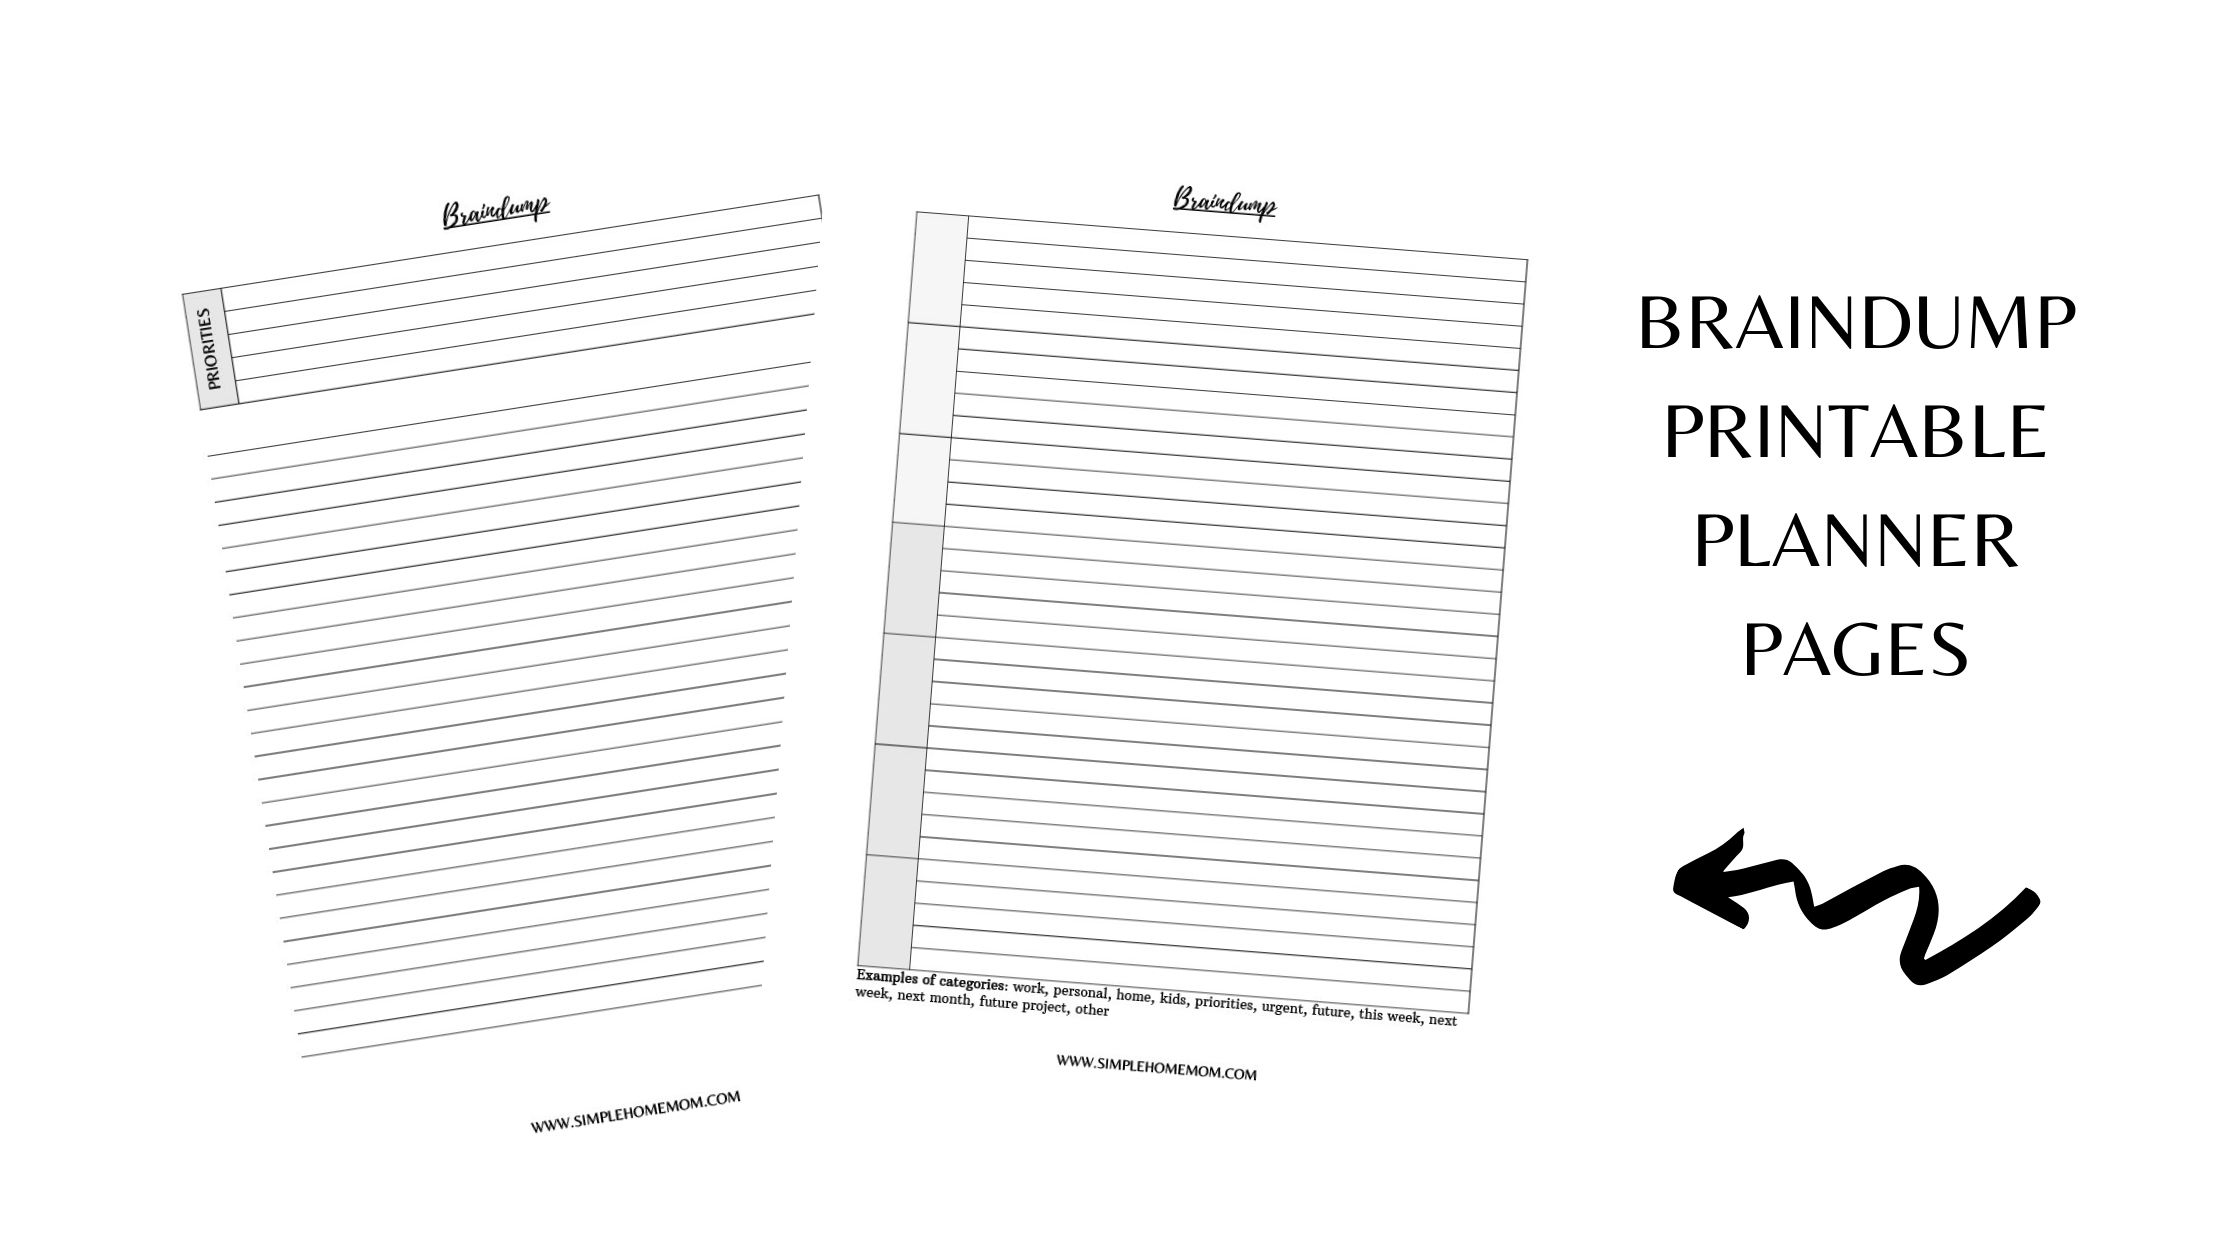 A picture of the braindump printable planning pages.